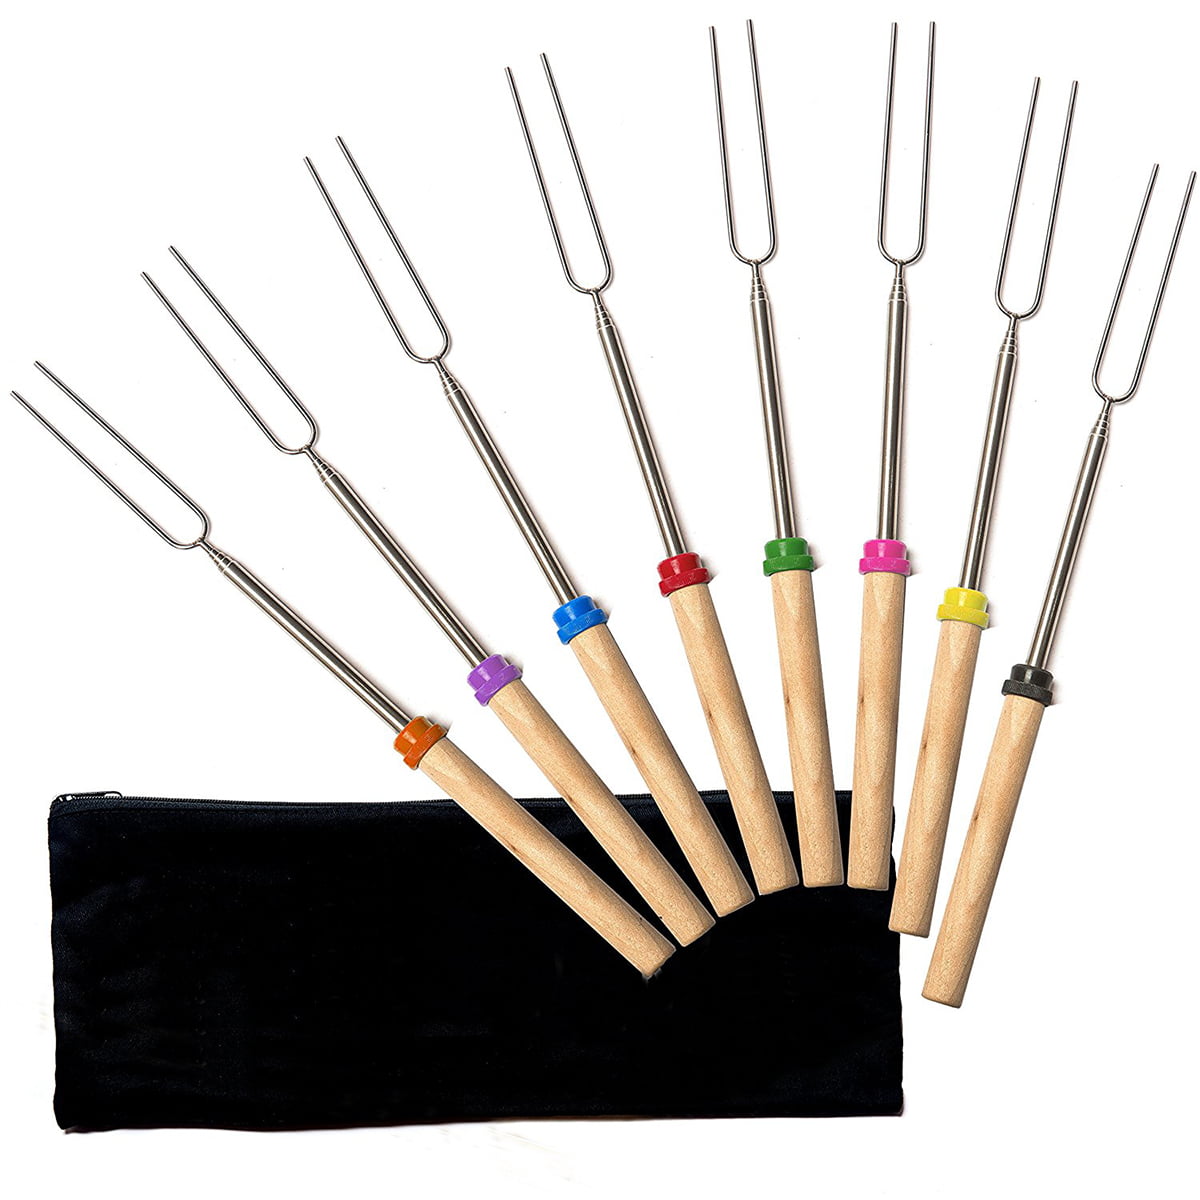 Triangle Sale Marshmallow Roasting Sticks Set of 6 Telescoping Extendable Smores Skewers For Camping FREE Storage Bag Bonfires Special Safe for Kids Hot Dog Toasting Forks 32 Inch Campfires 